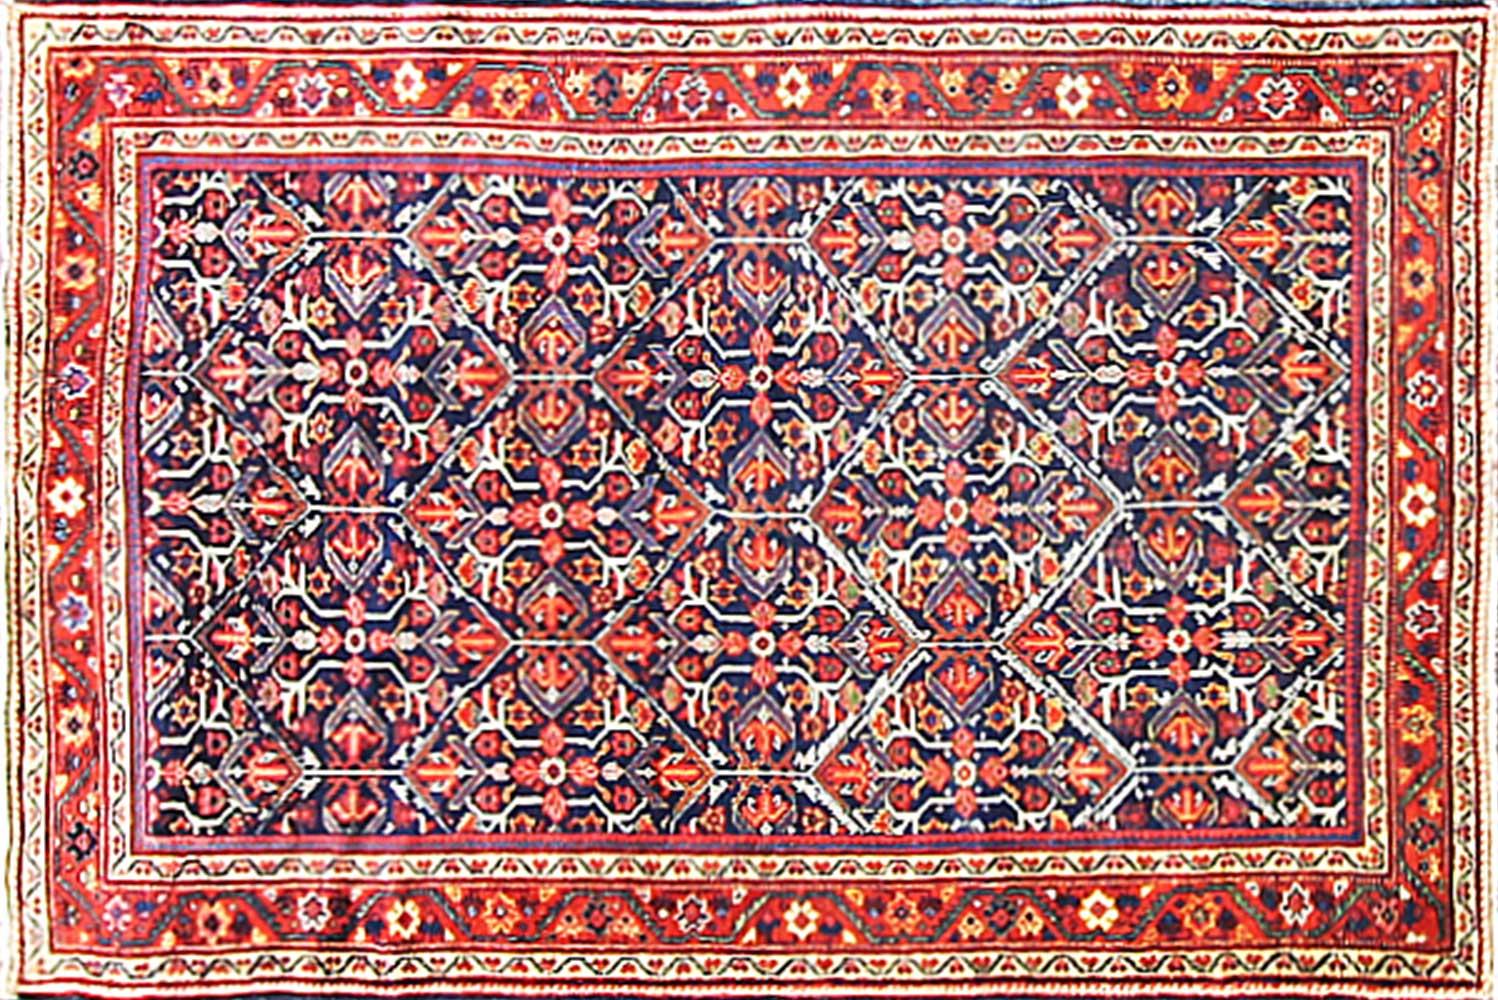 Vintage handwoven vegetable-dyed wool Persian Sultanabad rug. Features an allover geometric floral pattern in ivory and red on a blue field. Measures: 4'7